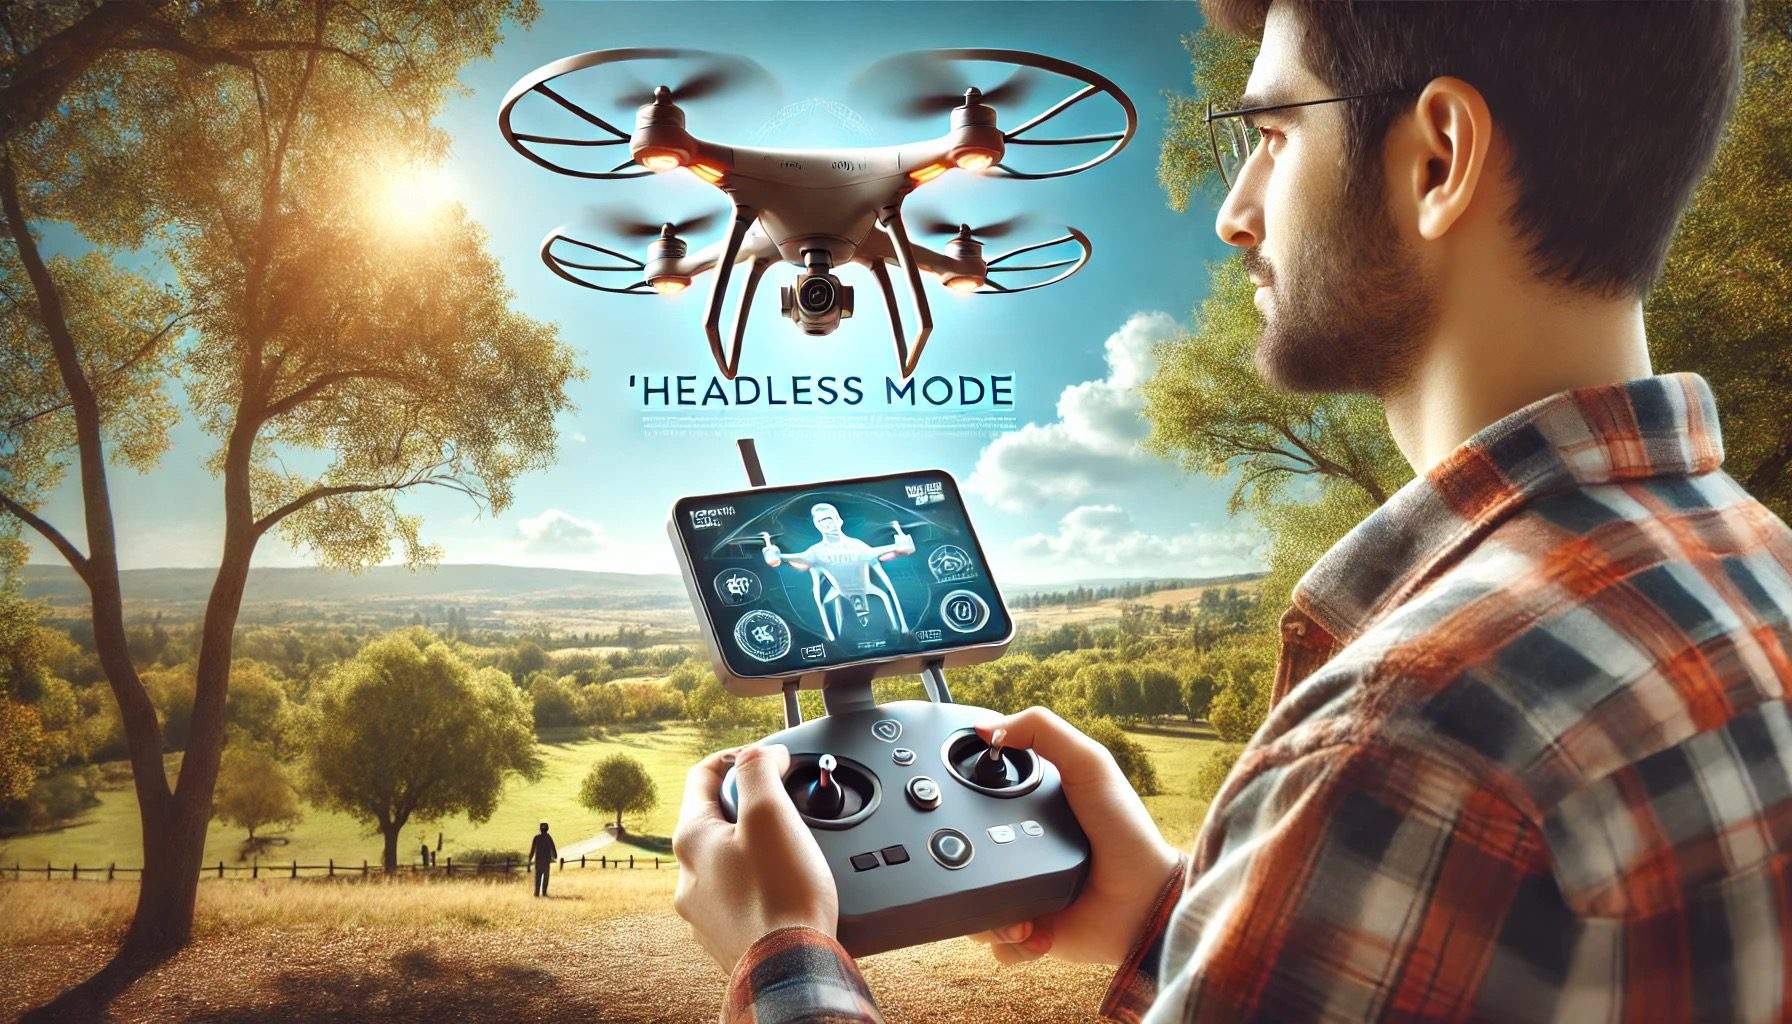 A beginner drone pilot flying a drone with a visible on-screen display showing 'Headless Mode' activated. The drone is mid-air in a scenic park with